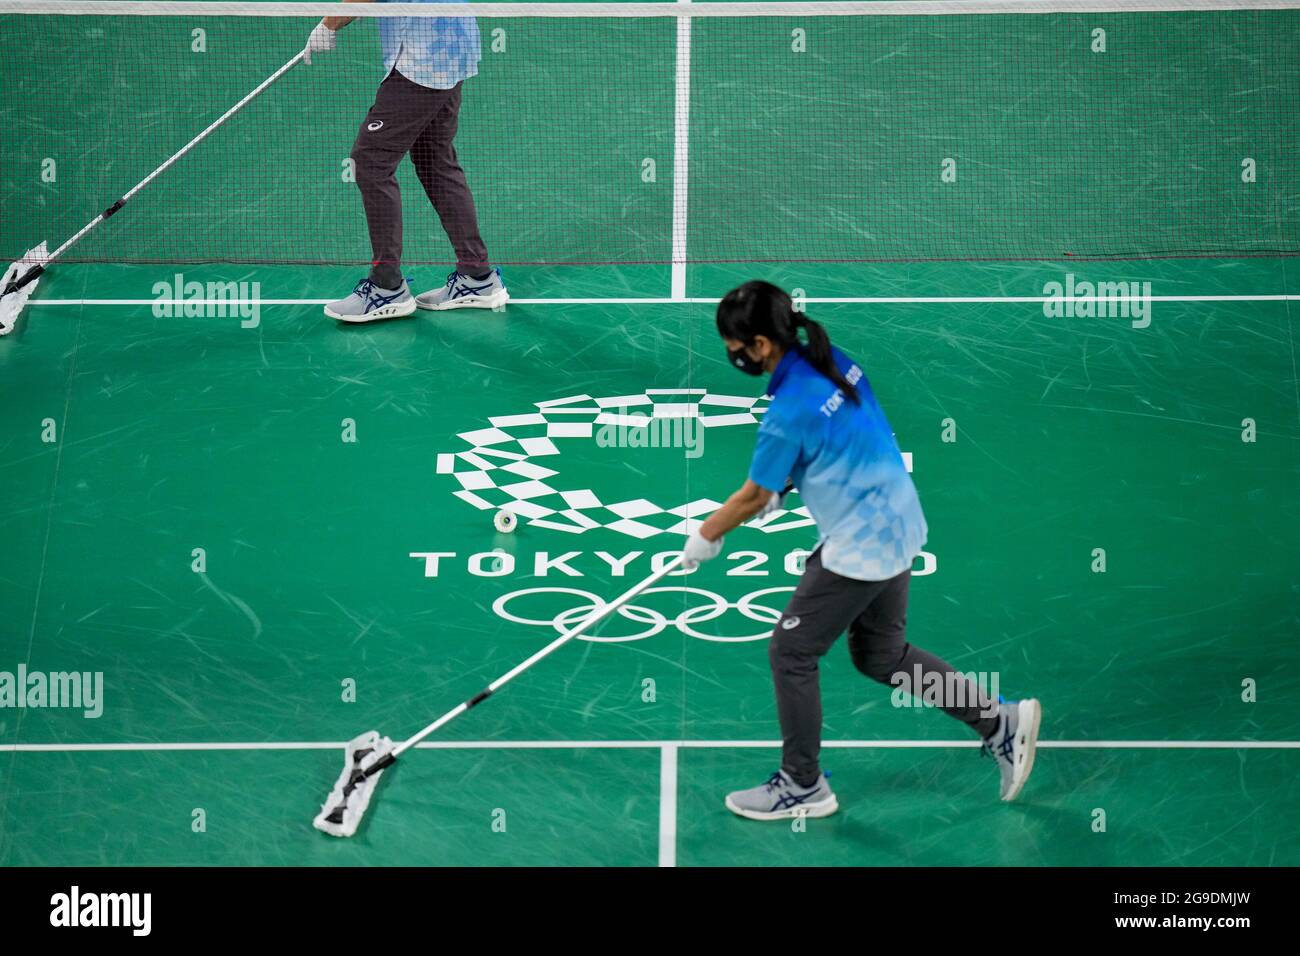 TOKYO, JAPAN - JULY 26: Volunteers of Tokyo 2020 are cleaning the floor  competing on Mixed Doubles Group Play Stage - Group A during the Tokyo 2020  Olympic Games at the Musashino